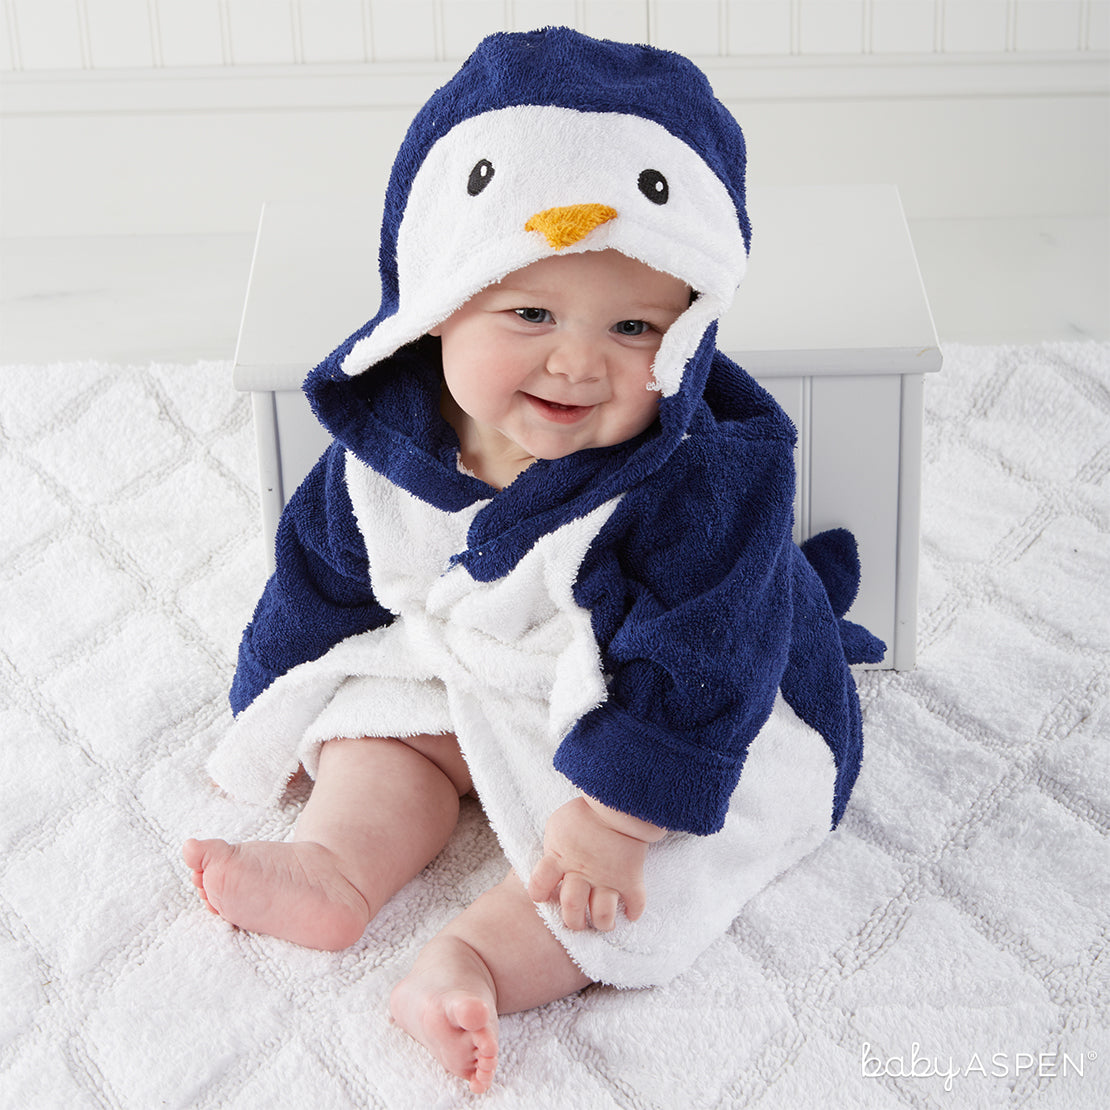 Penguin Hooded Bath Robe | 11 Warm Snuggly Bath Robes + Giveaway | Baby Aspen